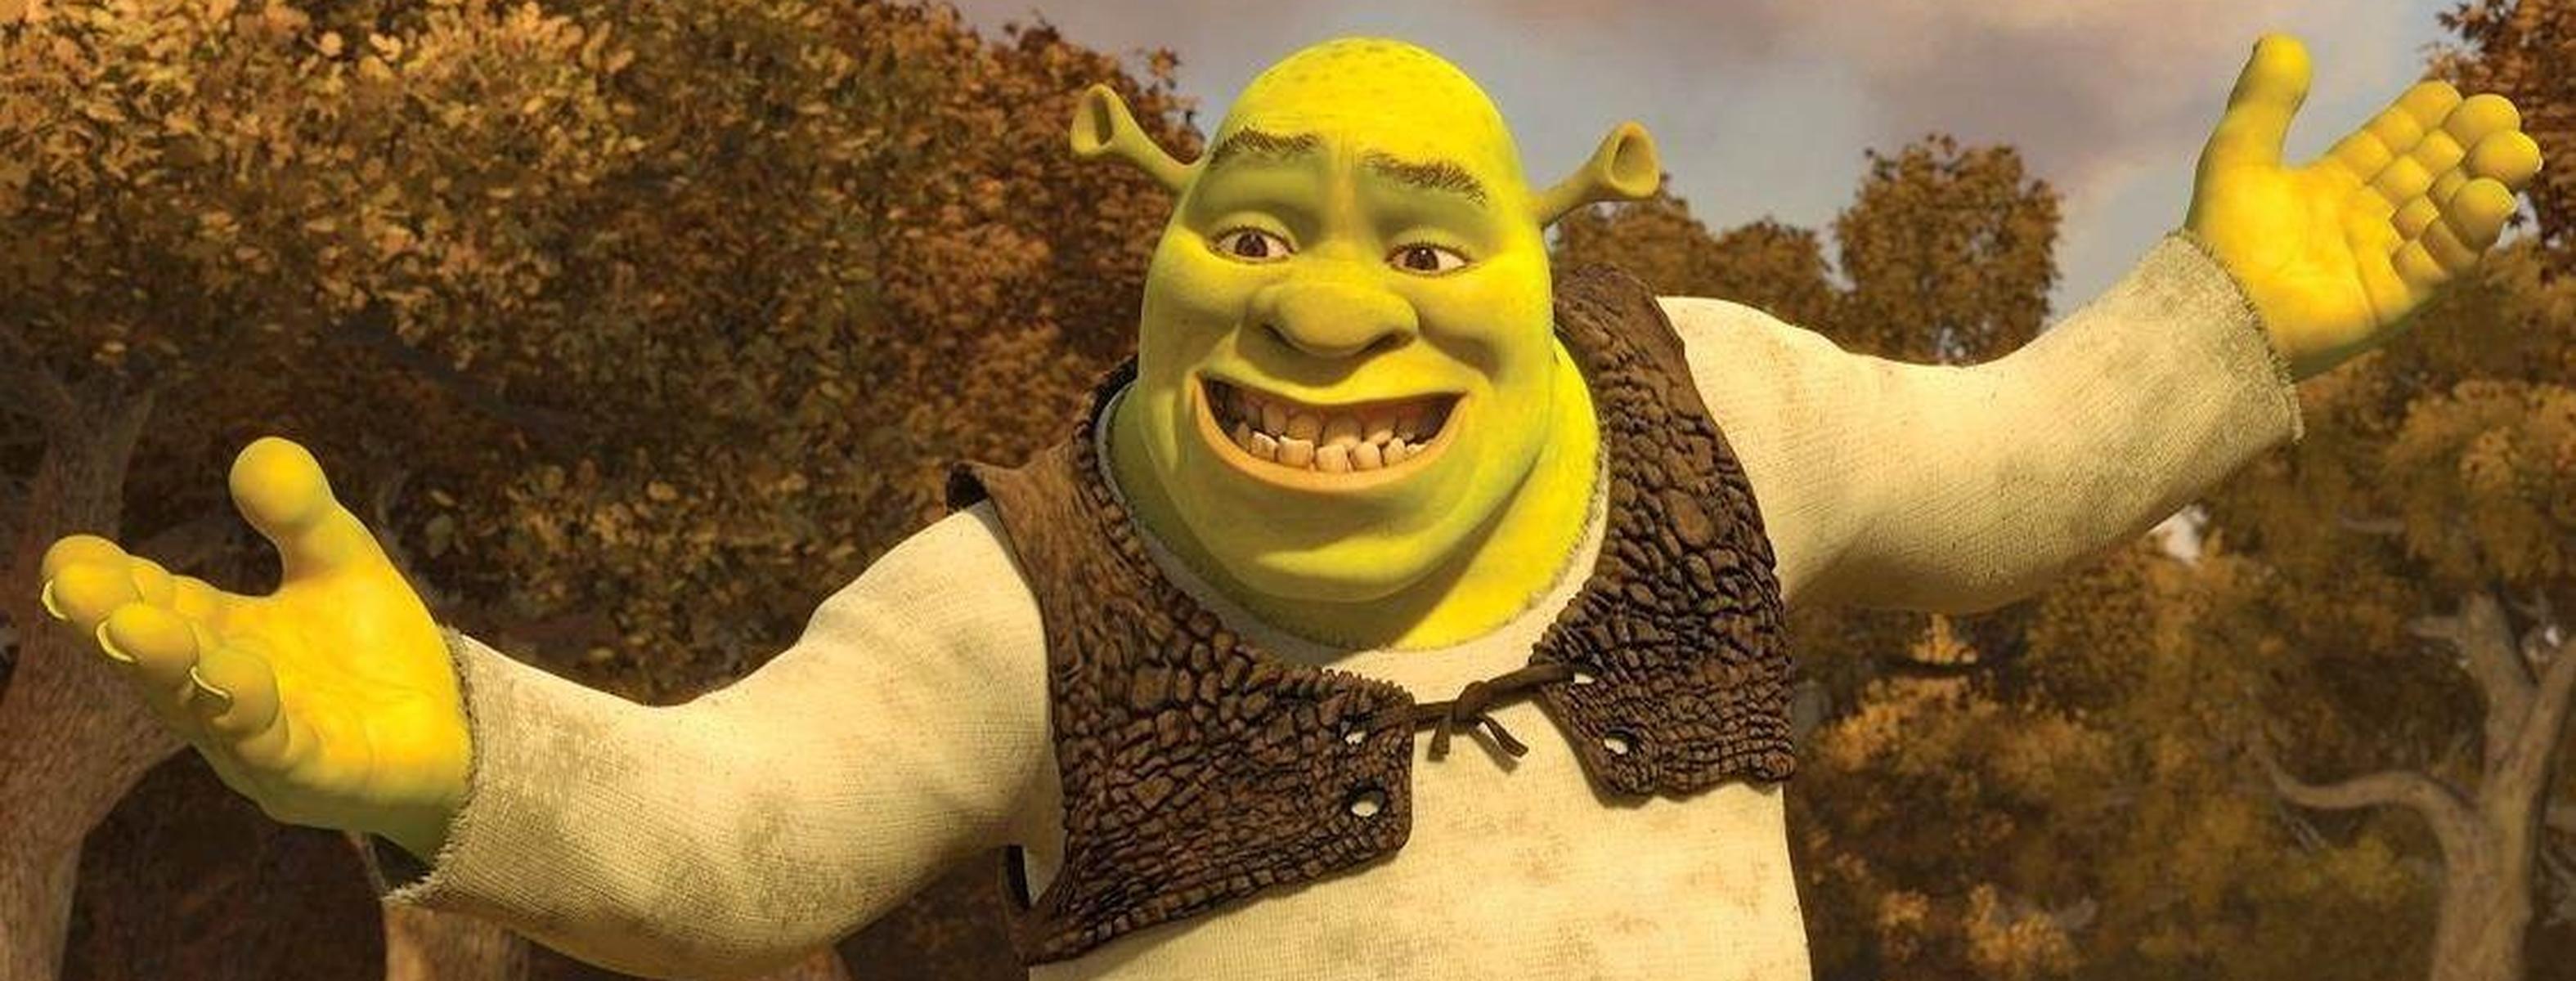 someone made a mixture of shrek and mike wazowski in.